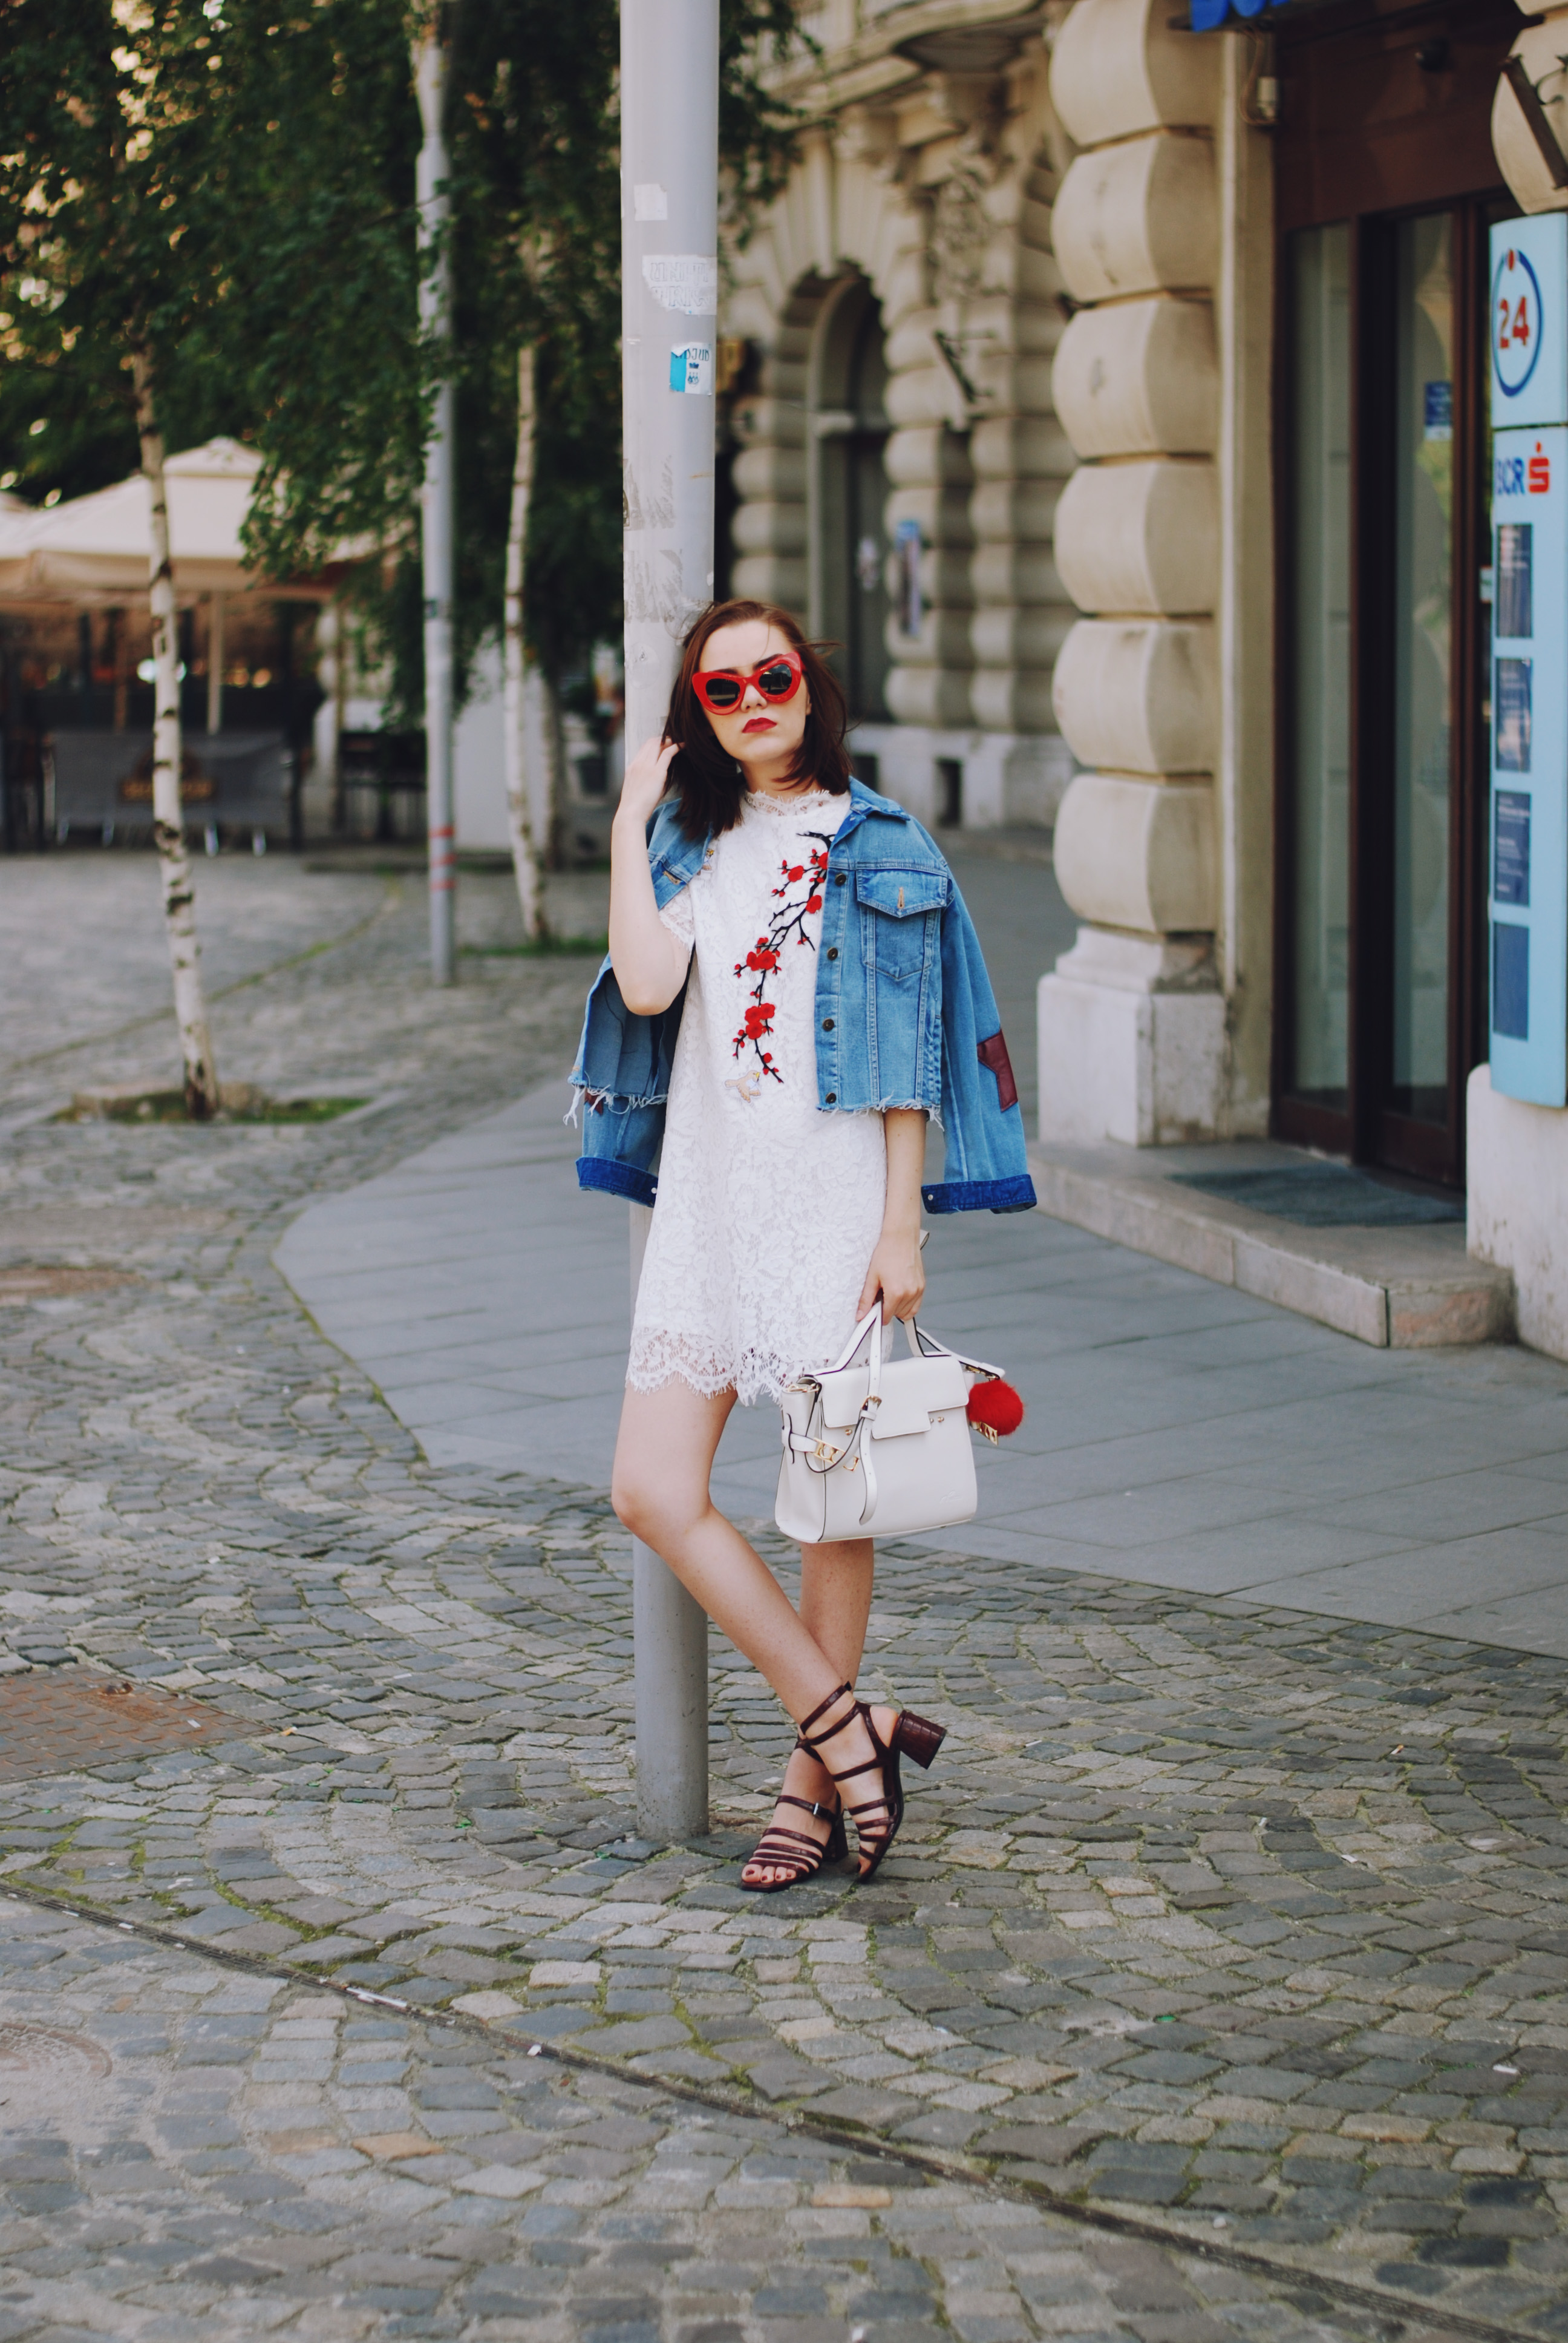 Embroidered white lace dress, red sunglasses, denim jacket, strappy sandals, white crossbody bag, red pom pom. cute summer outfit, Andreea Birsan